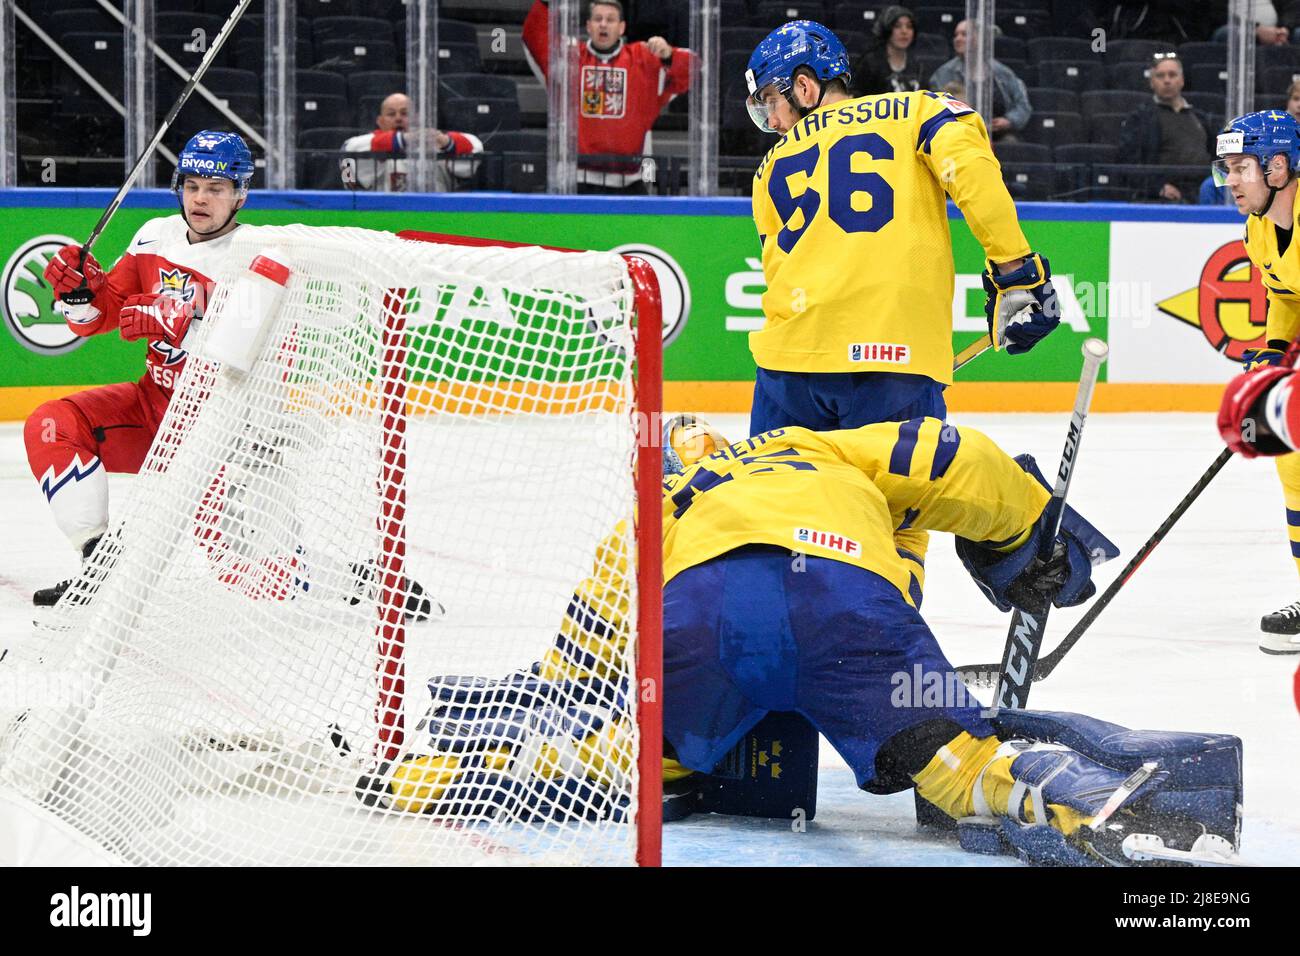 Tampere, Finland. 15th May, 2022. L-R Matej Blumel (CZE) celebrates scoring, goalkeeper Magnus Hellberg and Erik Gustafsson (both SWE) during the 2022 IIHF Ice Hockey World Championship, Group B match Czech Republic vs Sweden, on May 15, 2022, in Tampere, Finland. Credit: Michal Kamaryt/CTK Photo/Alamy Live News Stock Photo